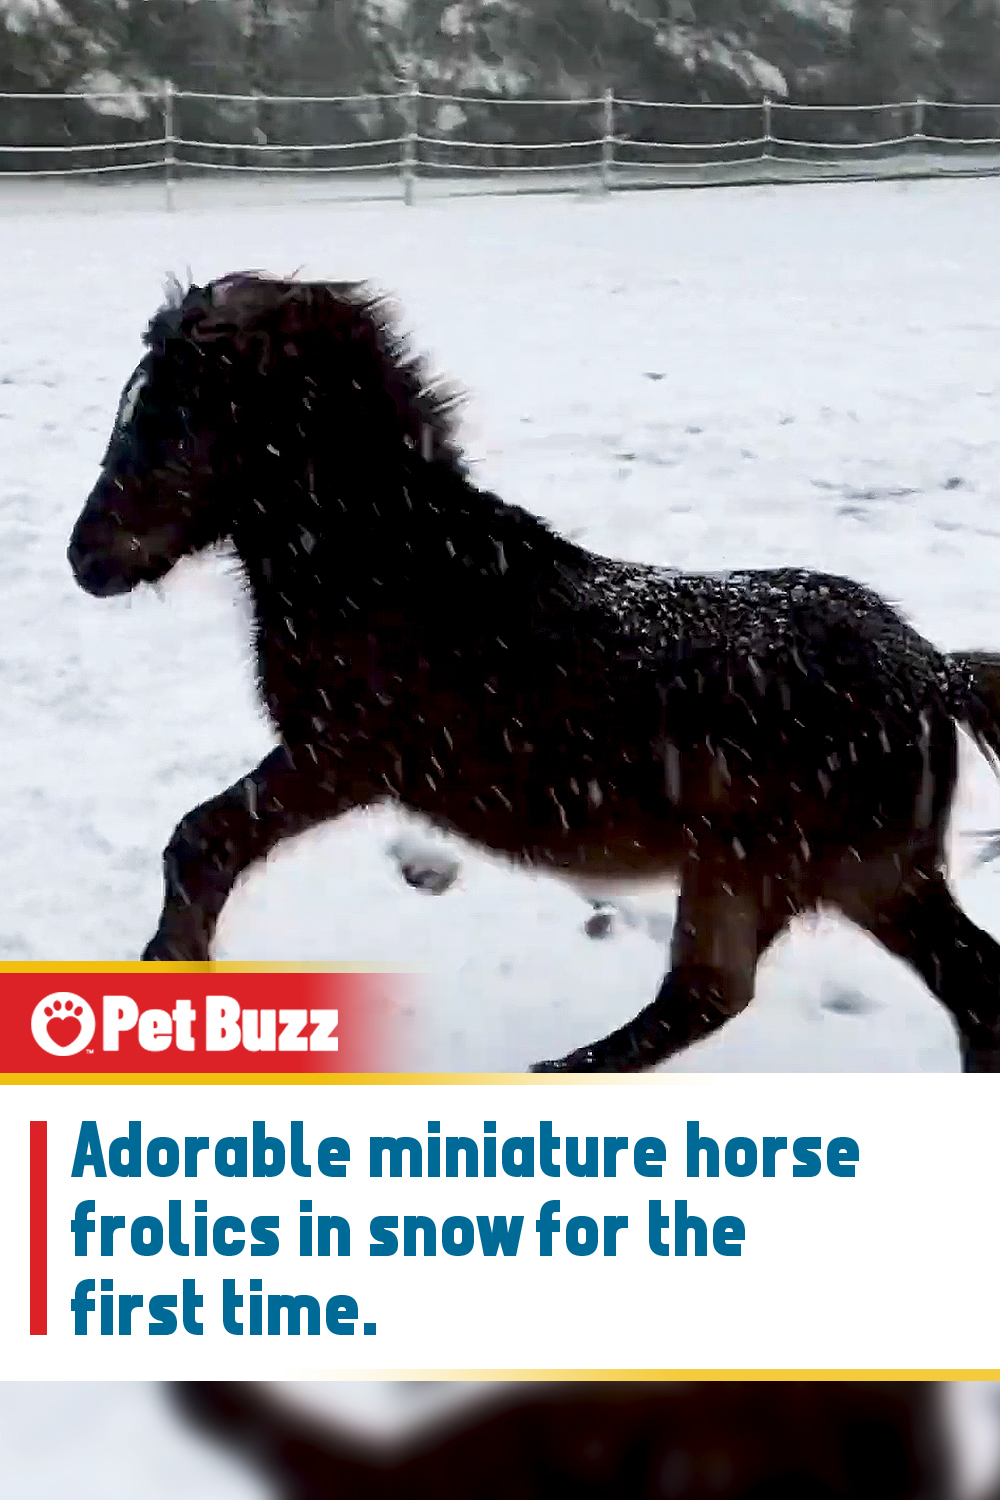 Adorable miniature horse frolics in snow for the first time.